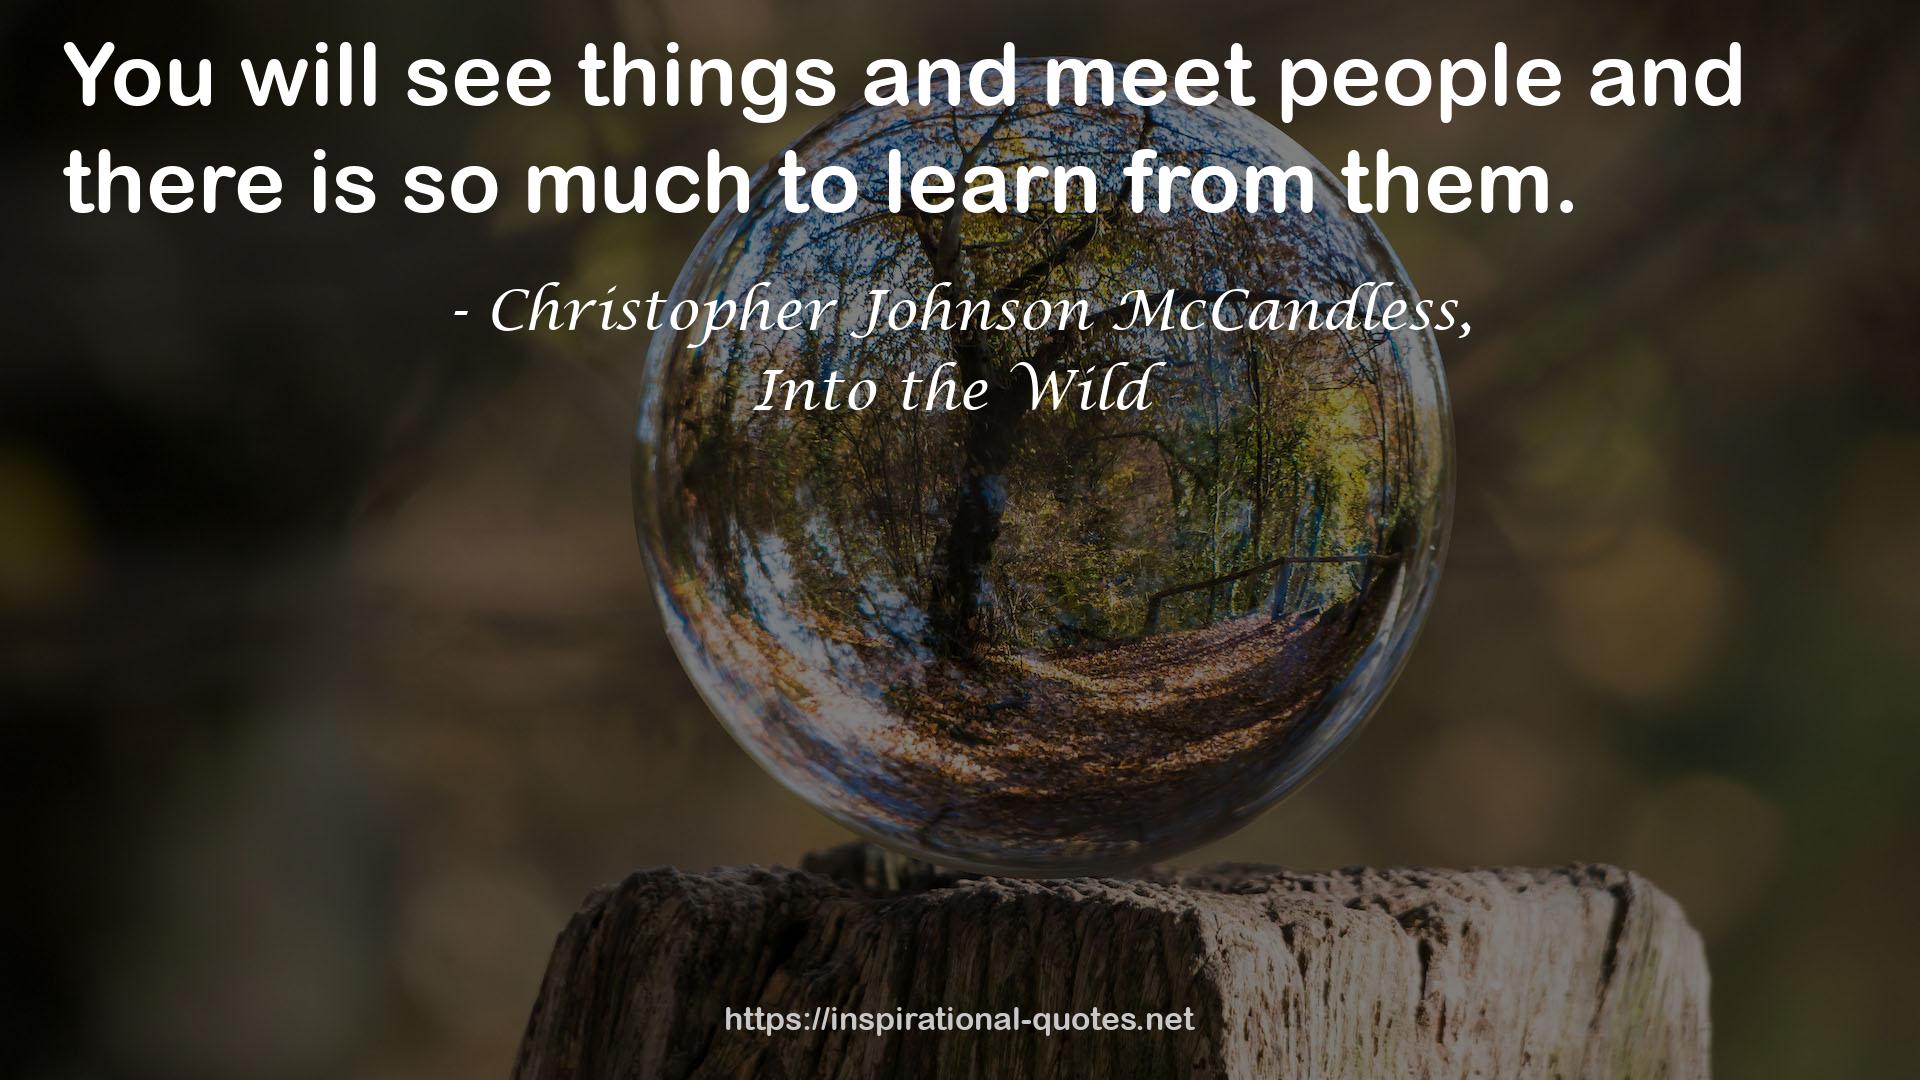 Christopher Johnson McCandless, QUOTES